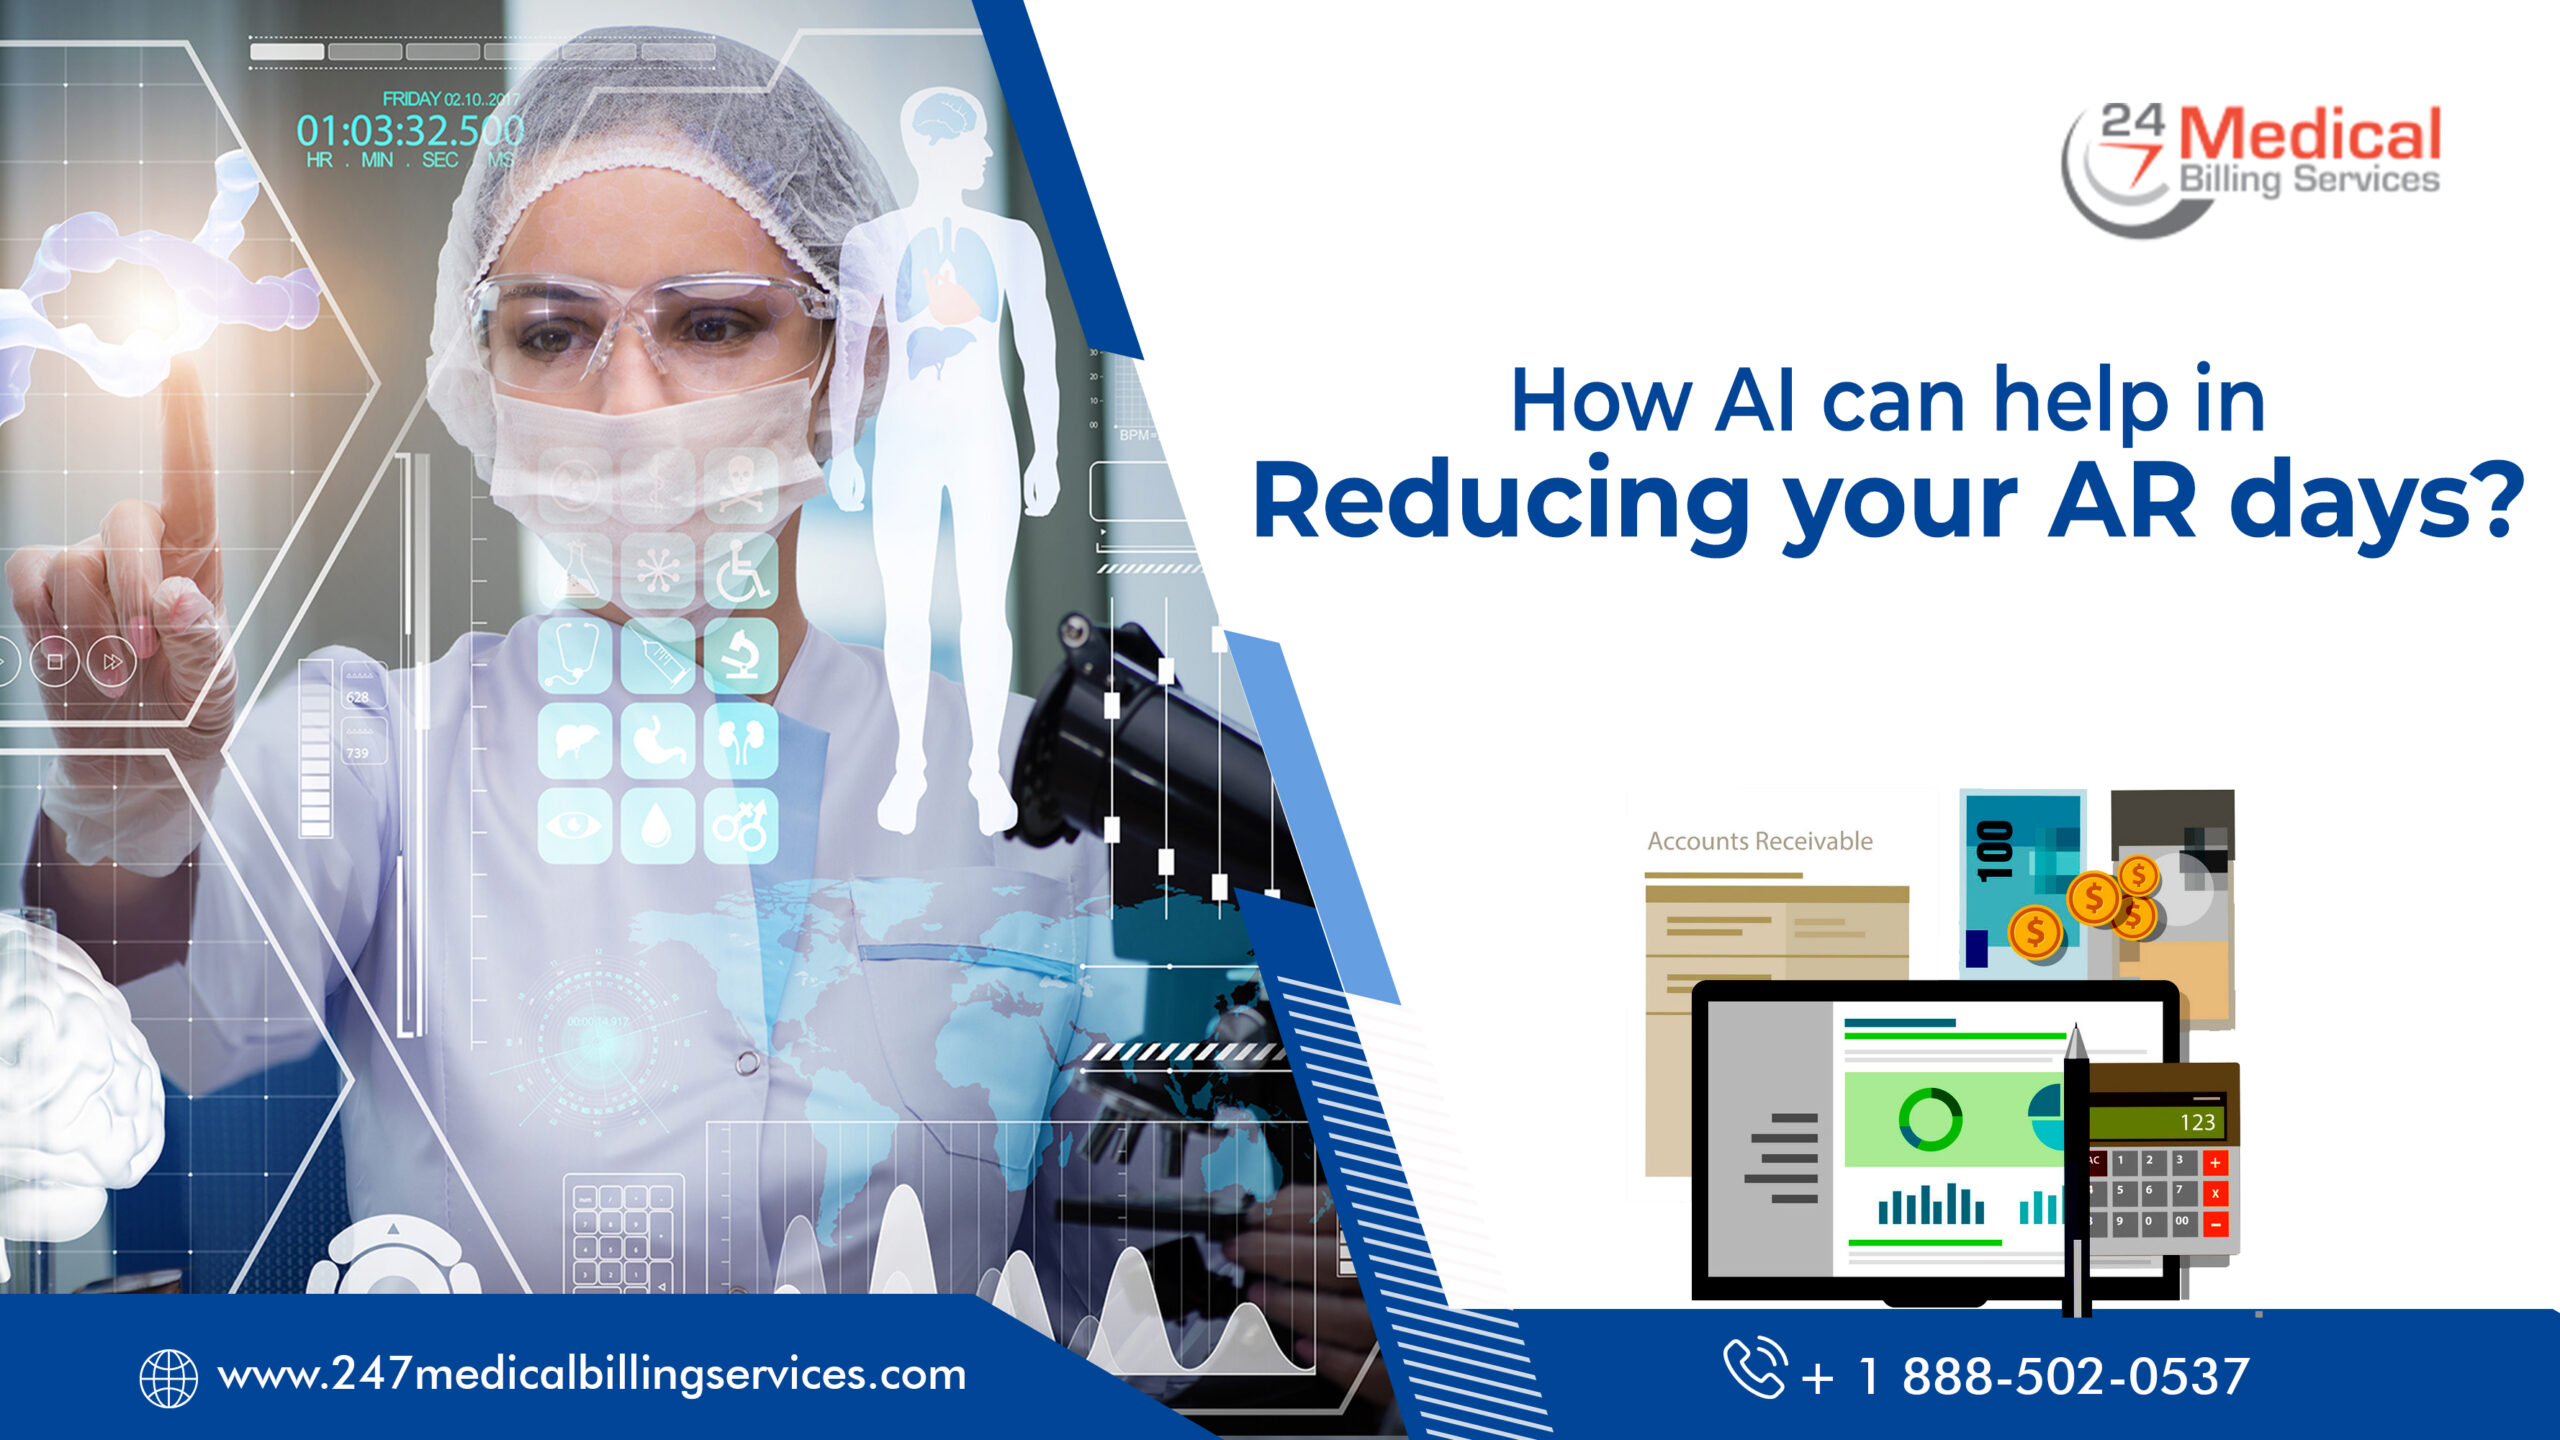  How AI Can Help in Reducing Your AR Days?